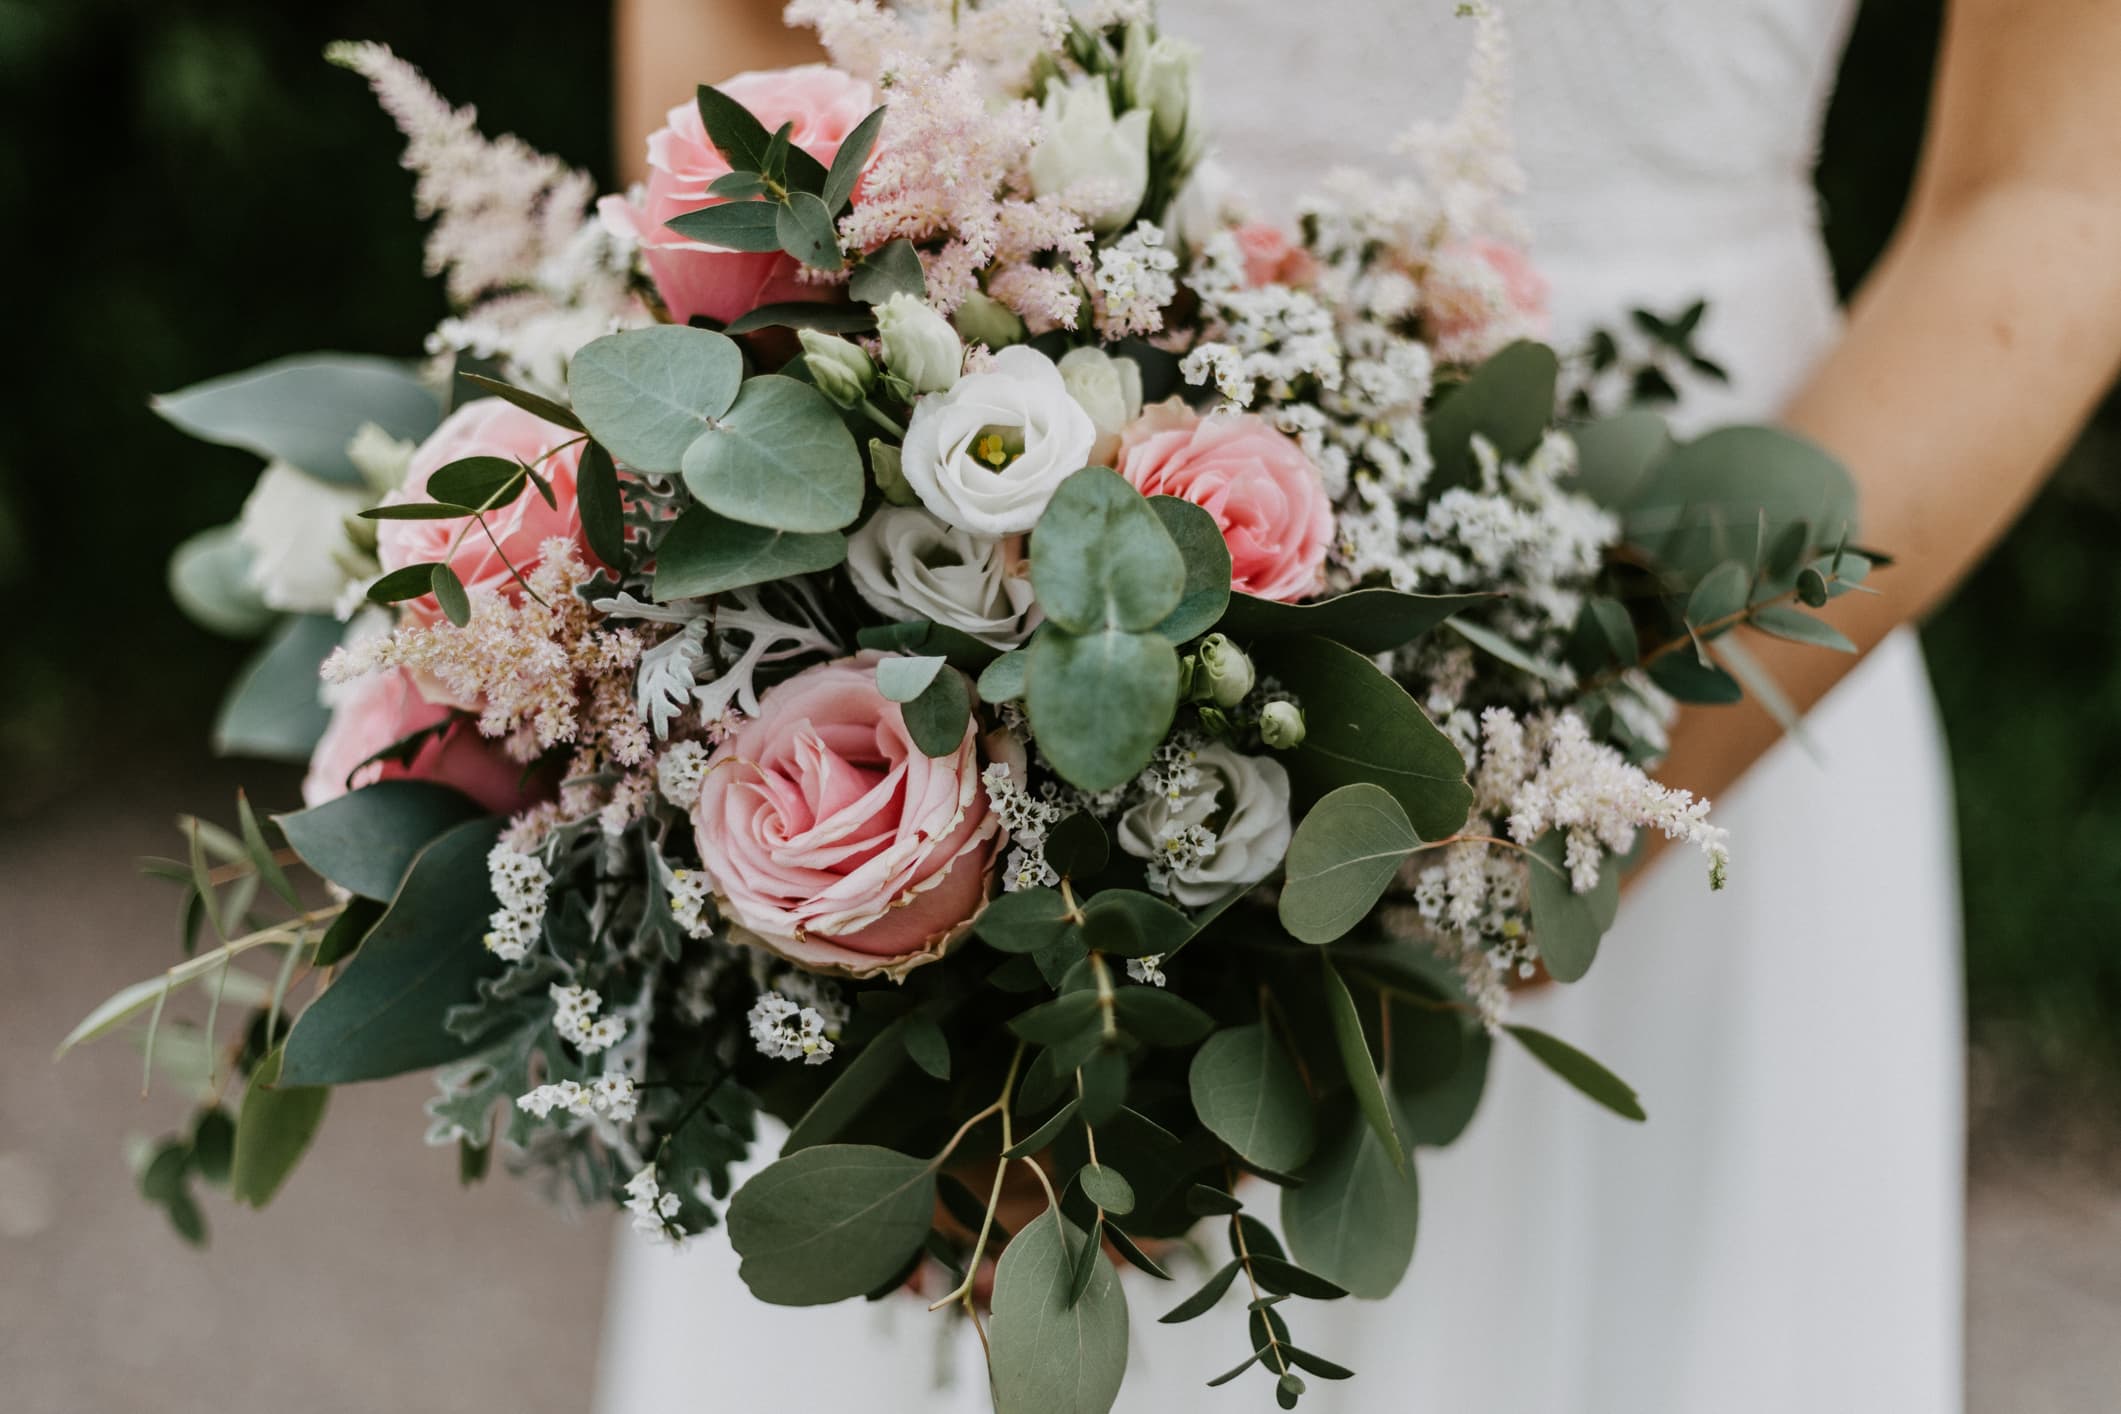 How to cut flower costs at your wedding, according to florists